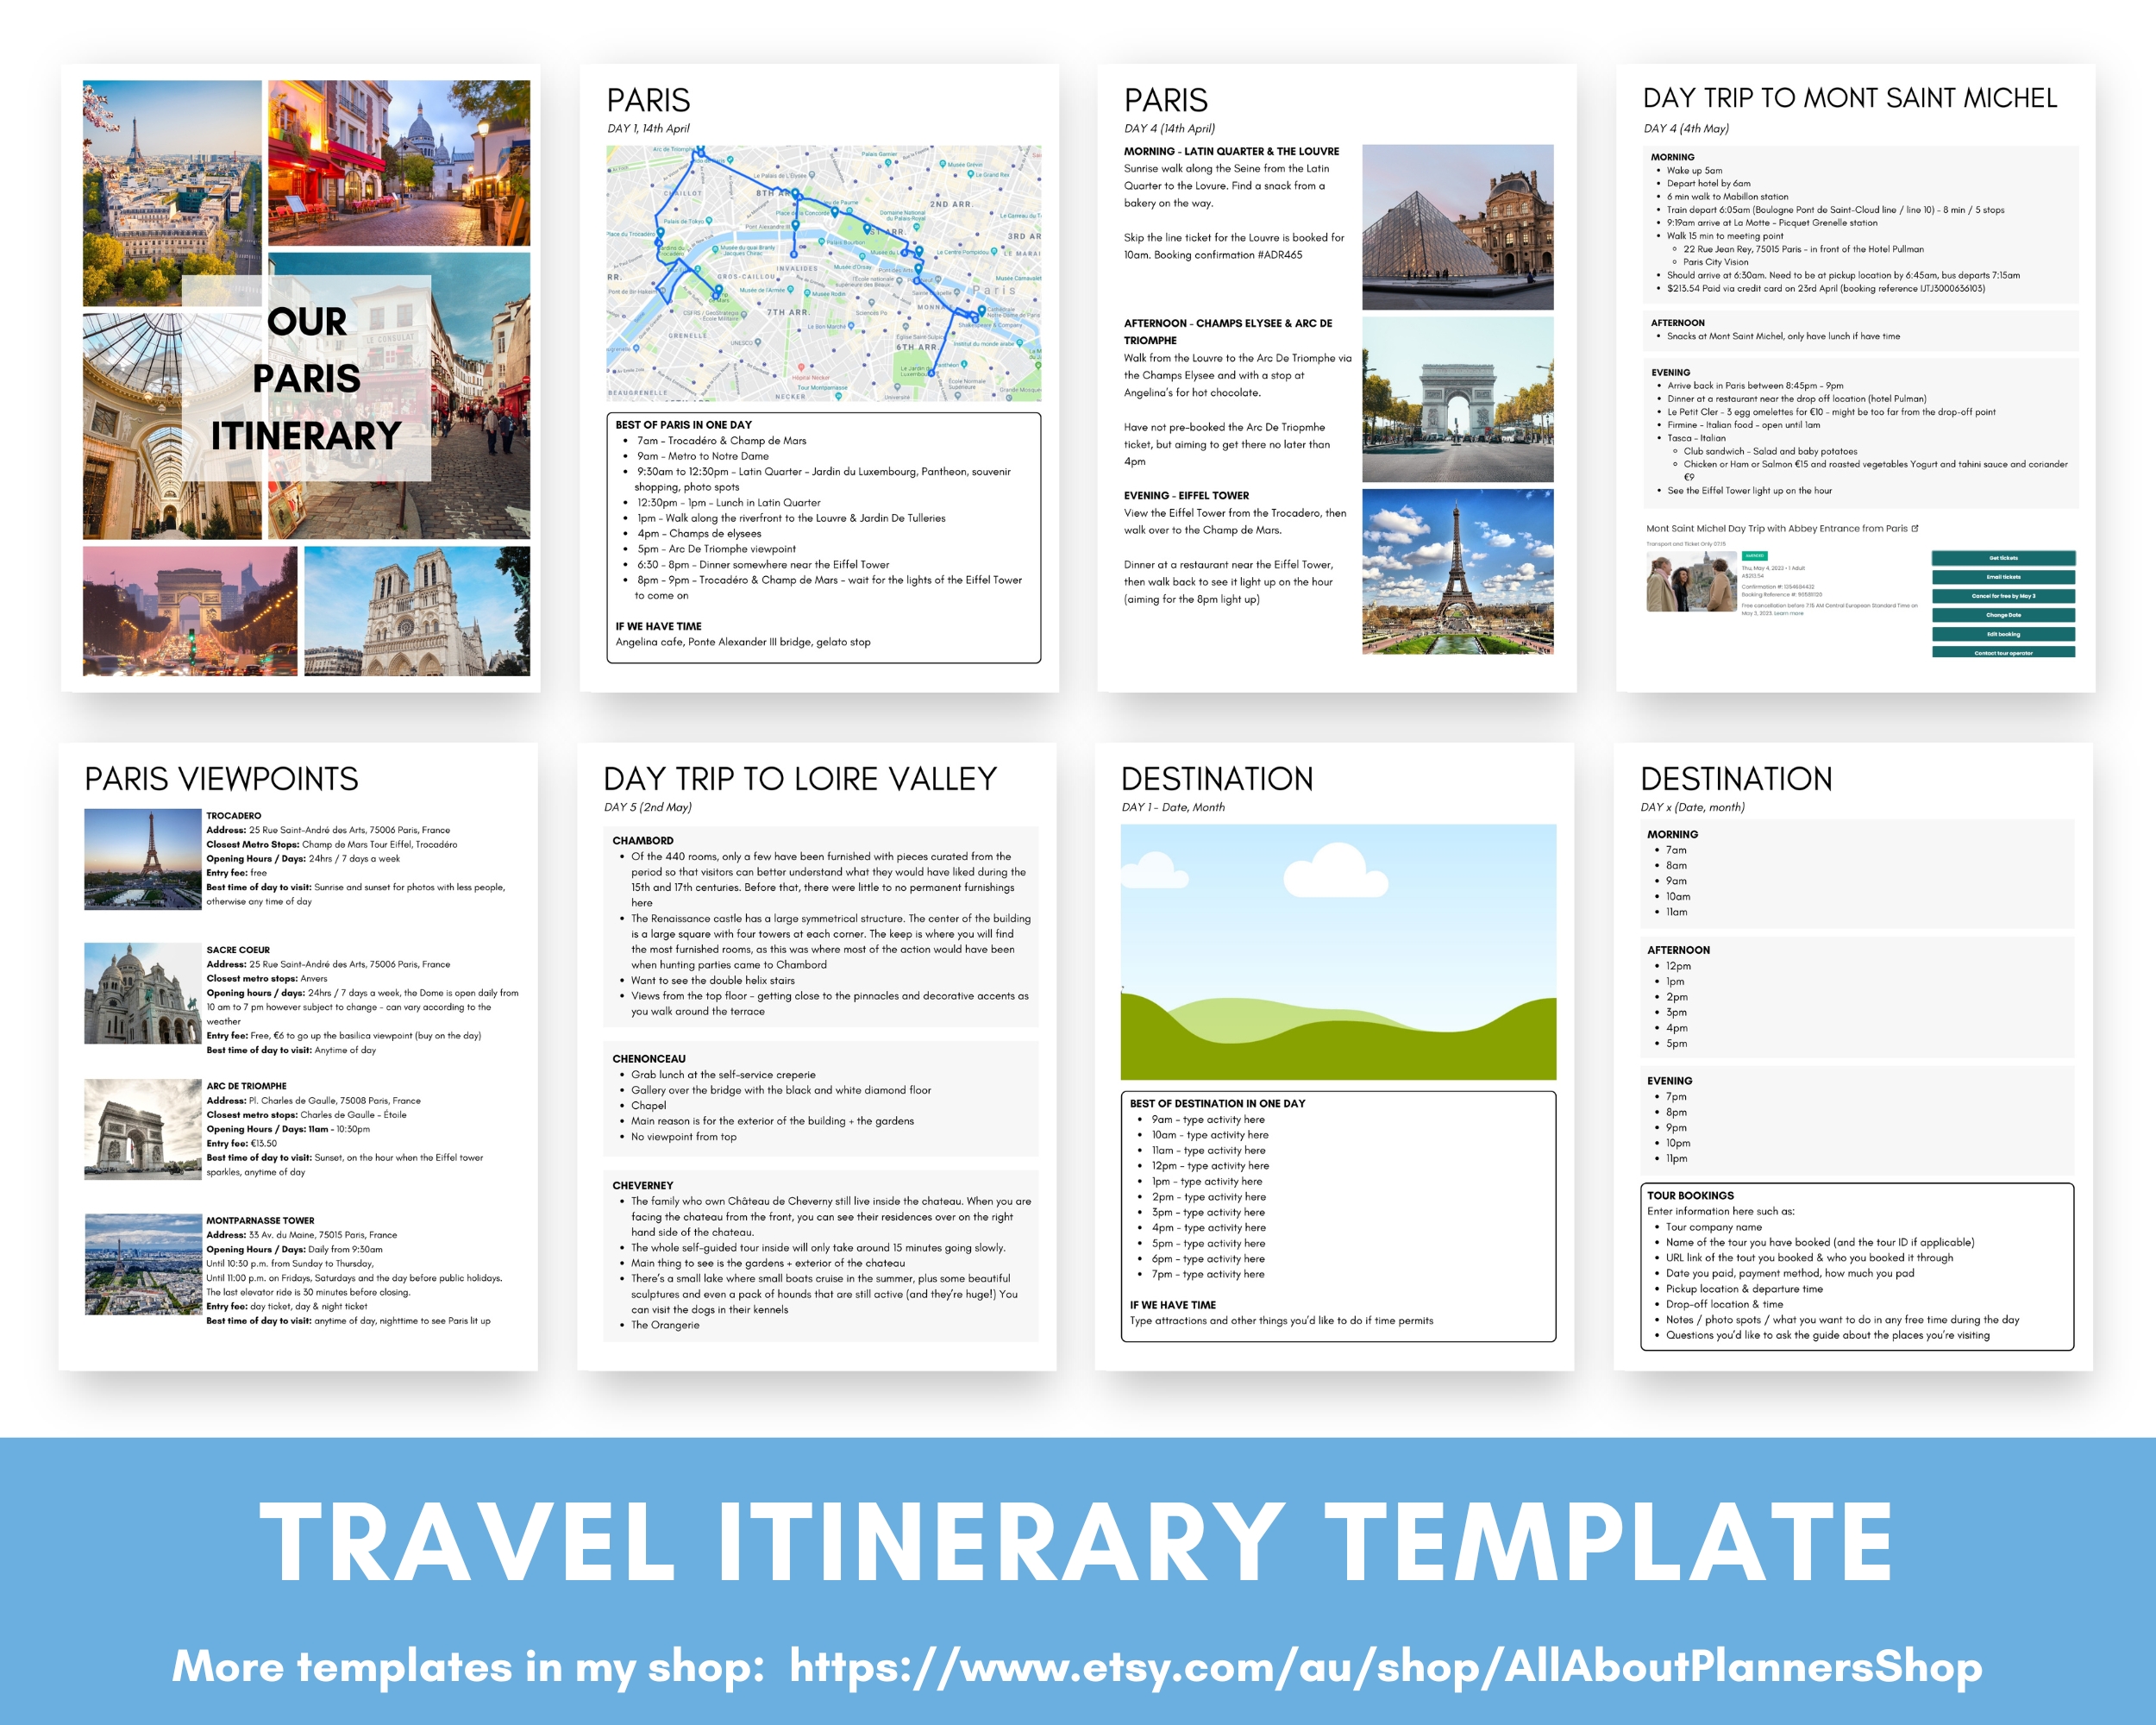 daily travel itinerary template for overseas holiday to europe customise in canva day trip booking accommodation tours research comparison